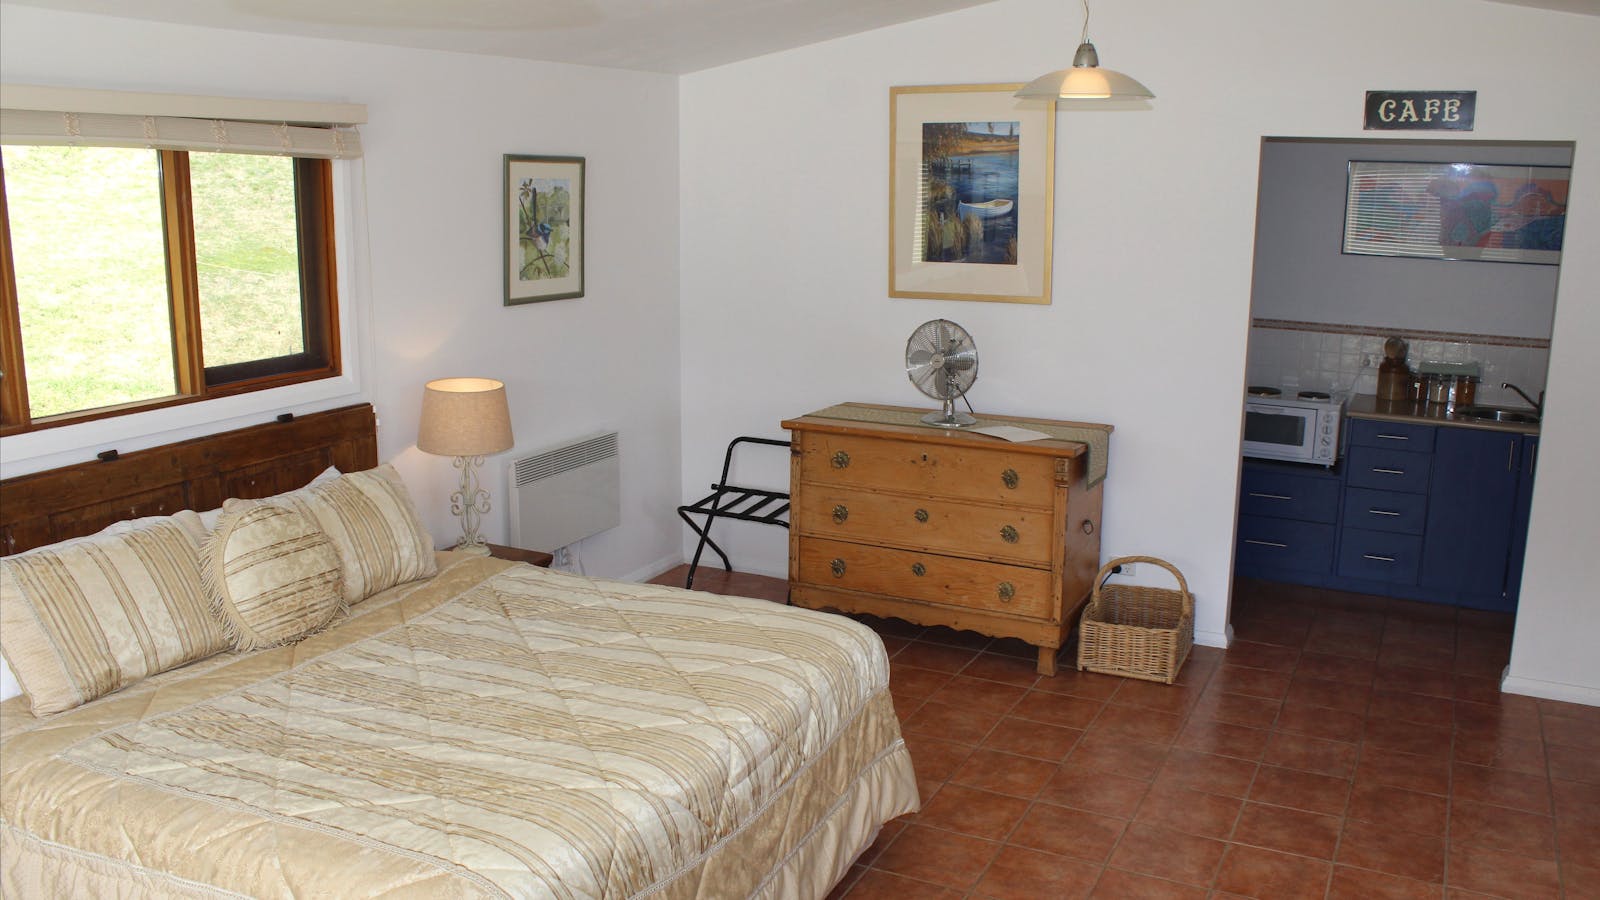 The studio contains a king size bed and has a fully equipped kitchen